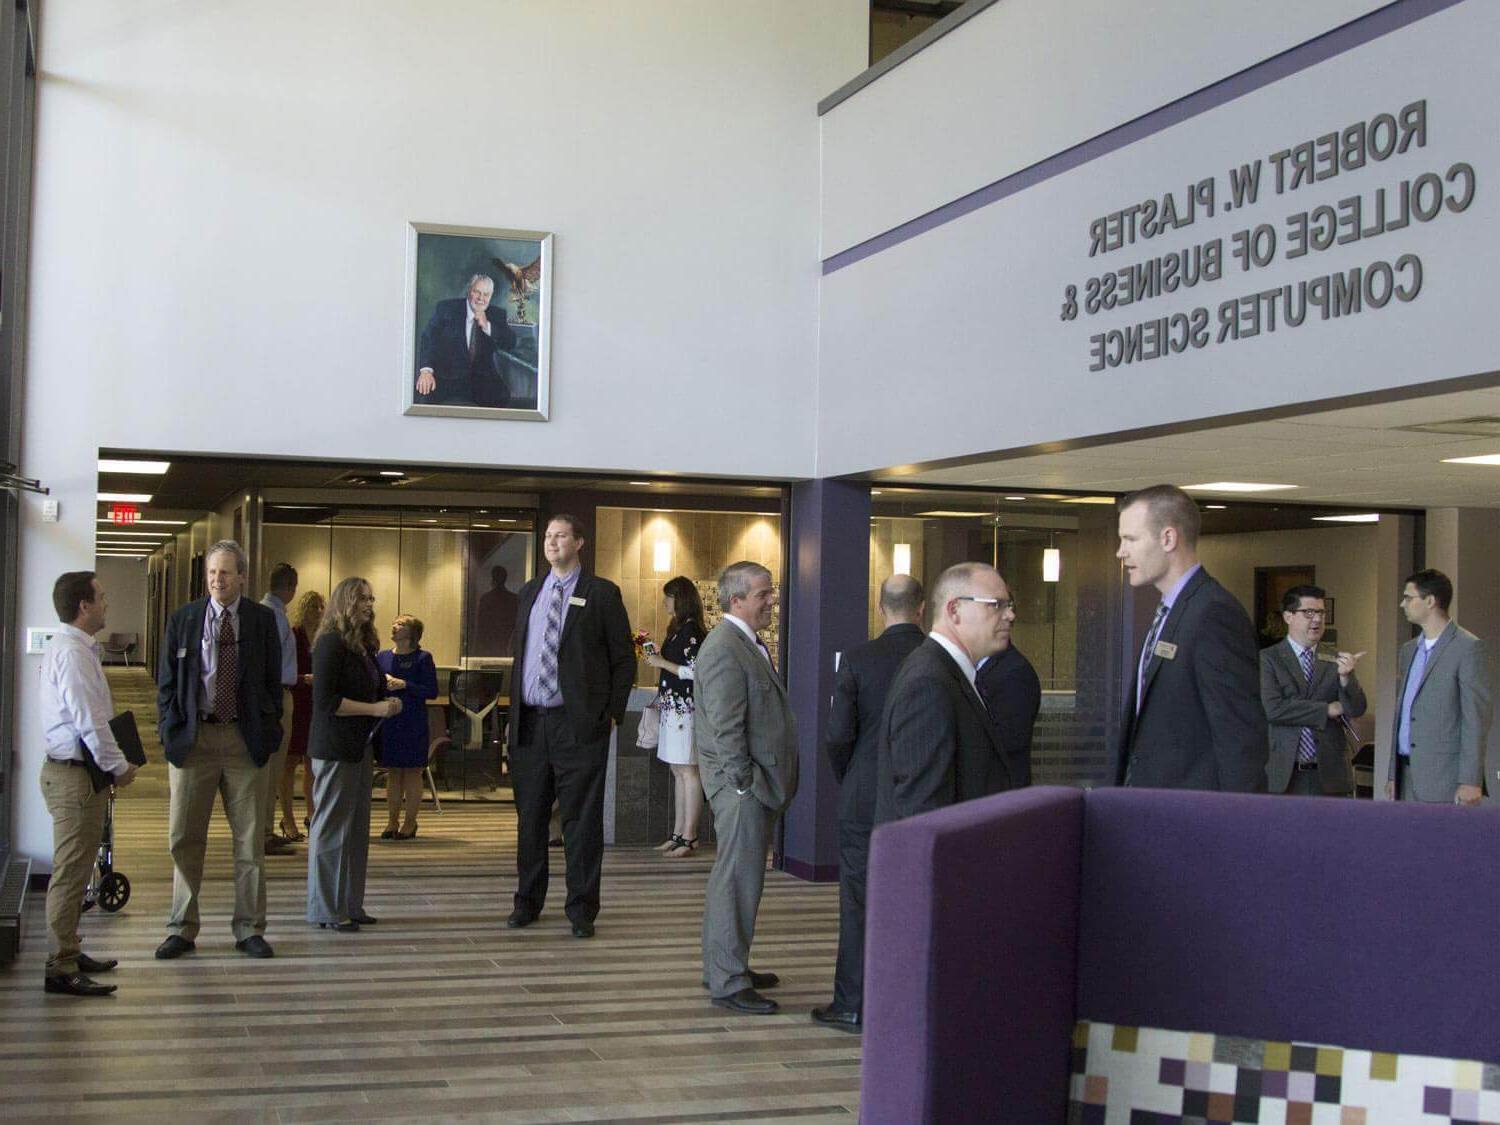 businesspeople mingle in building lobby